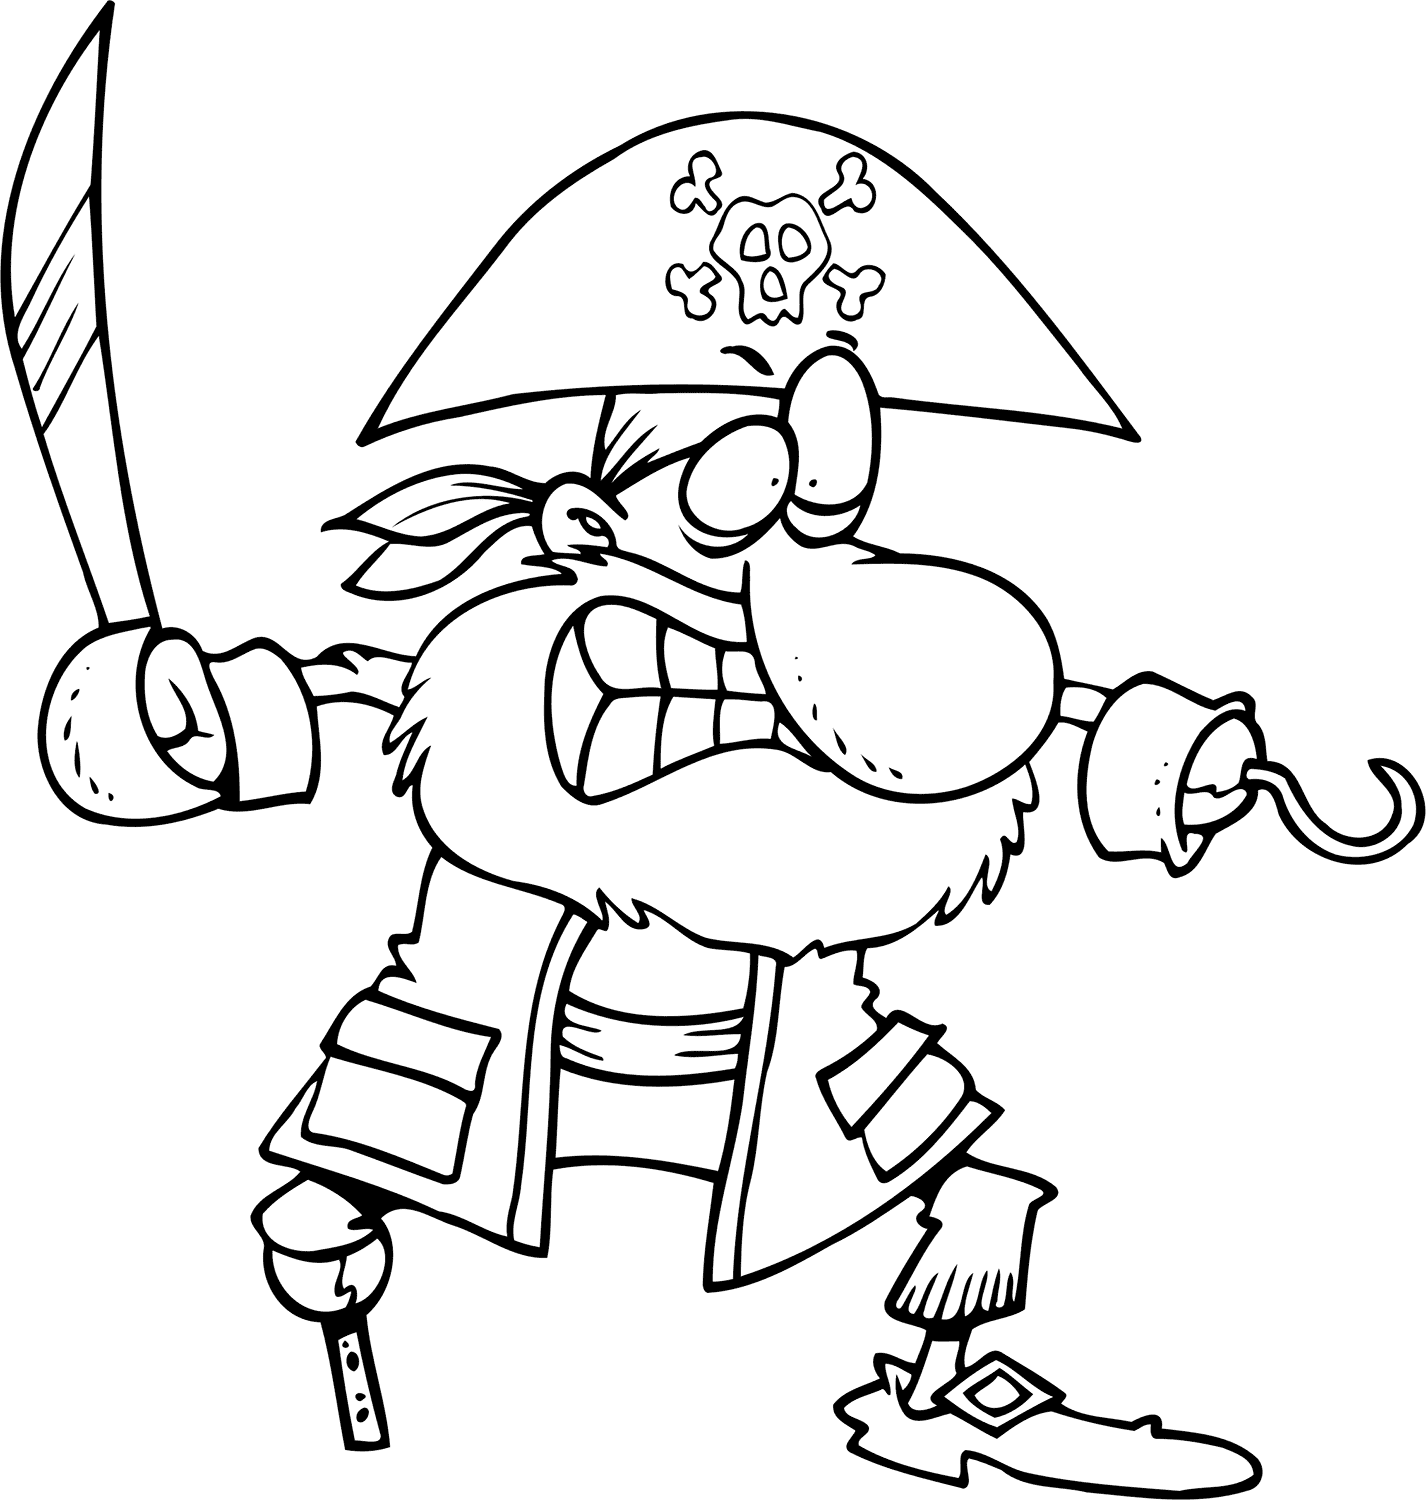 Funny Cartoon Pirate Coloring Page